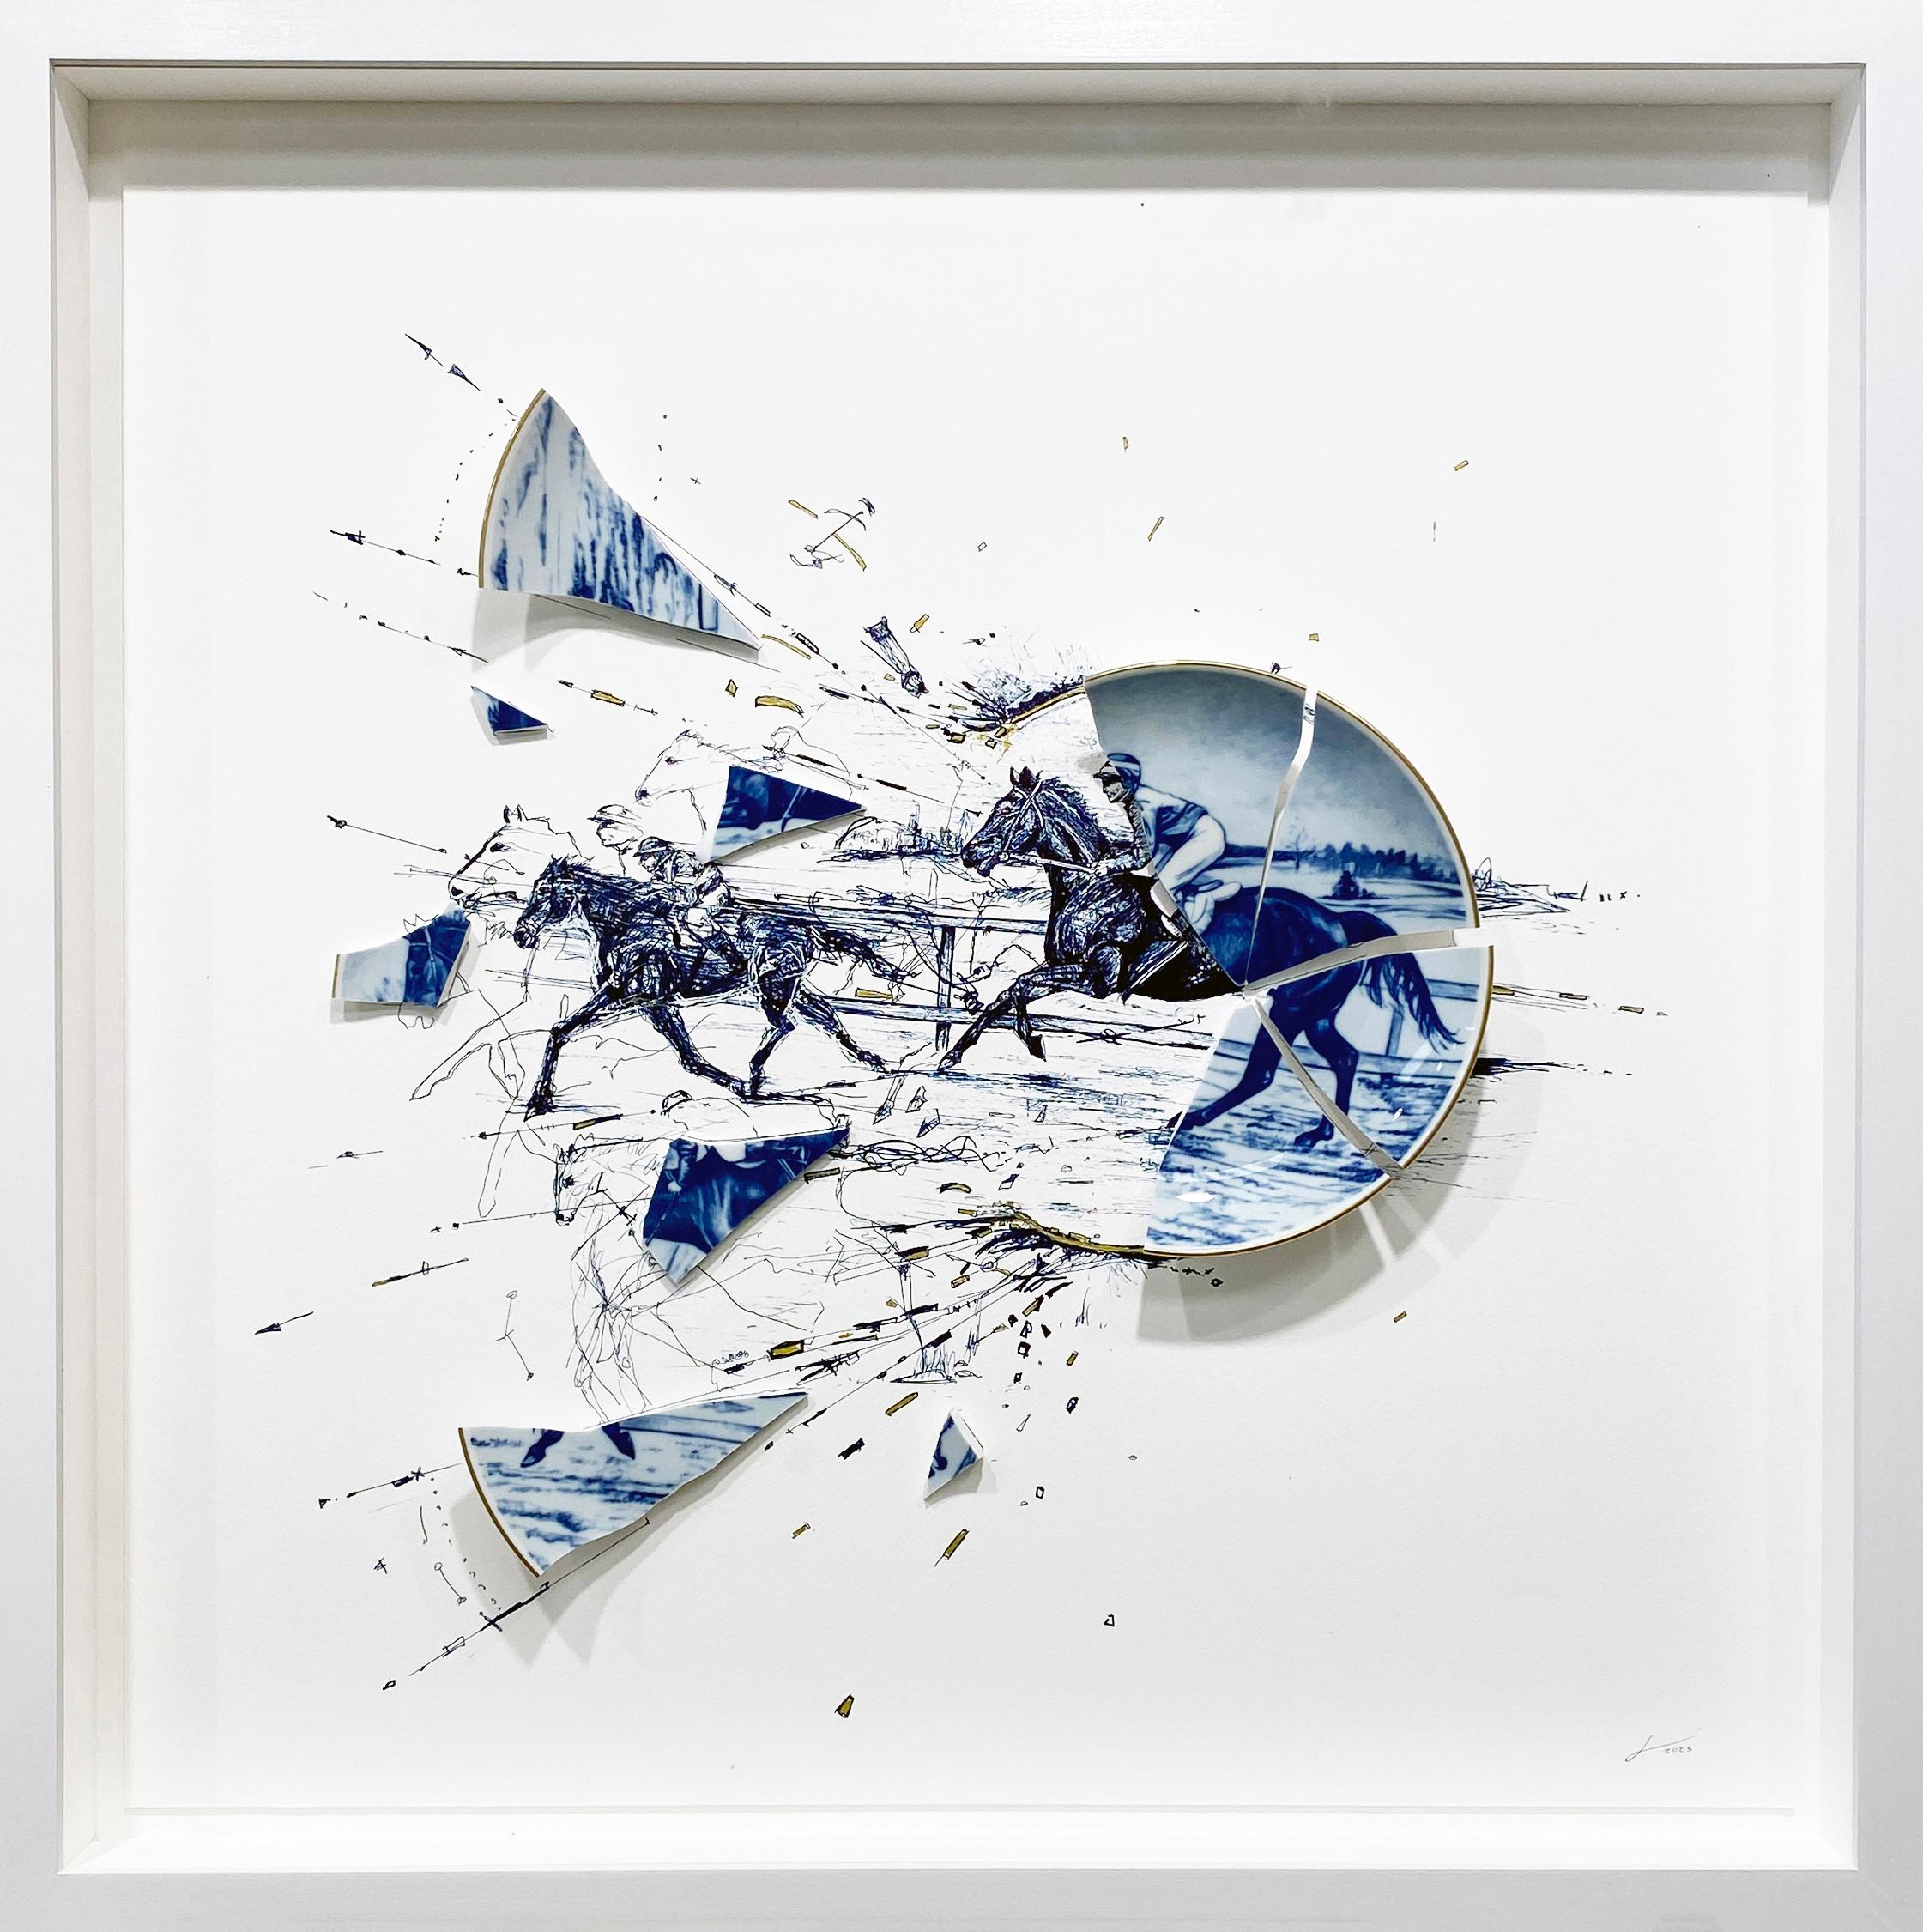 Available at Madelyn Jordon Fine Art.  'The Race' 2024 by American artist Robert Strati. Broken plate and ink on paper, 21 x 21 x 1.5 in. / Frame: 24 x 24 x 2.5 in. This work incorporates pieces of an antique shattered plate depicting a jockey on a